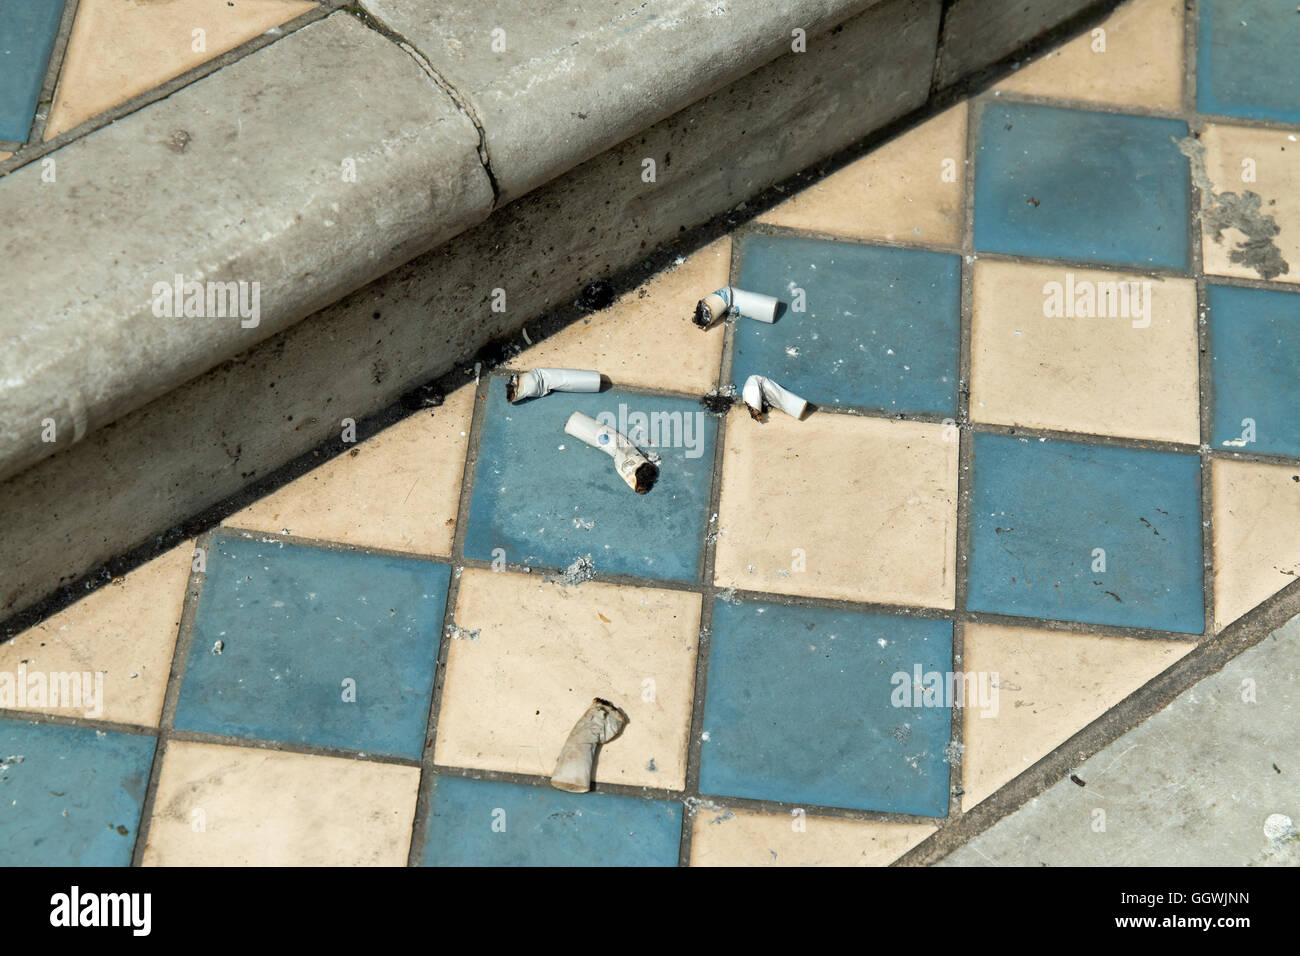 Cigarette butts on tiled step of old house. Stock Photo